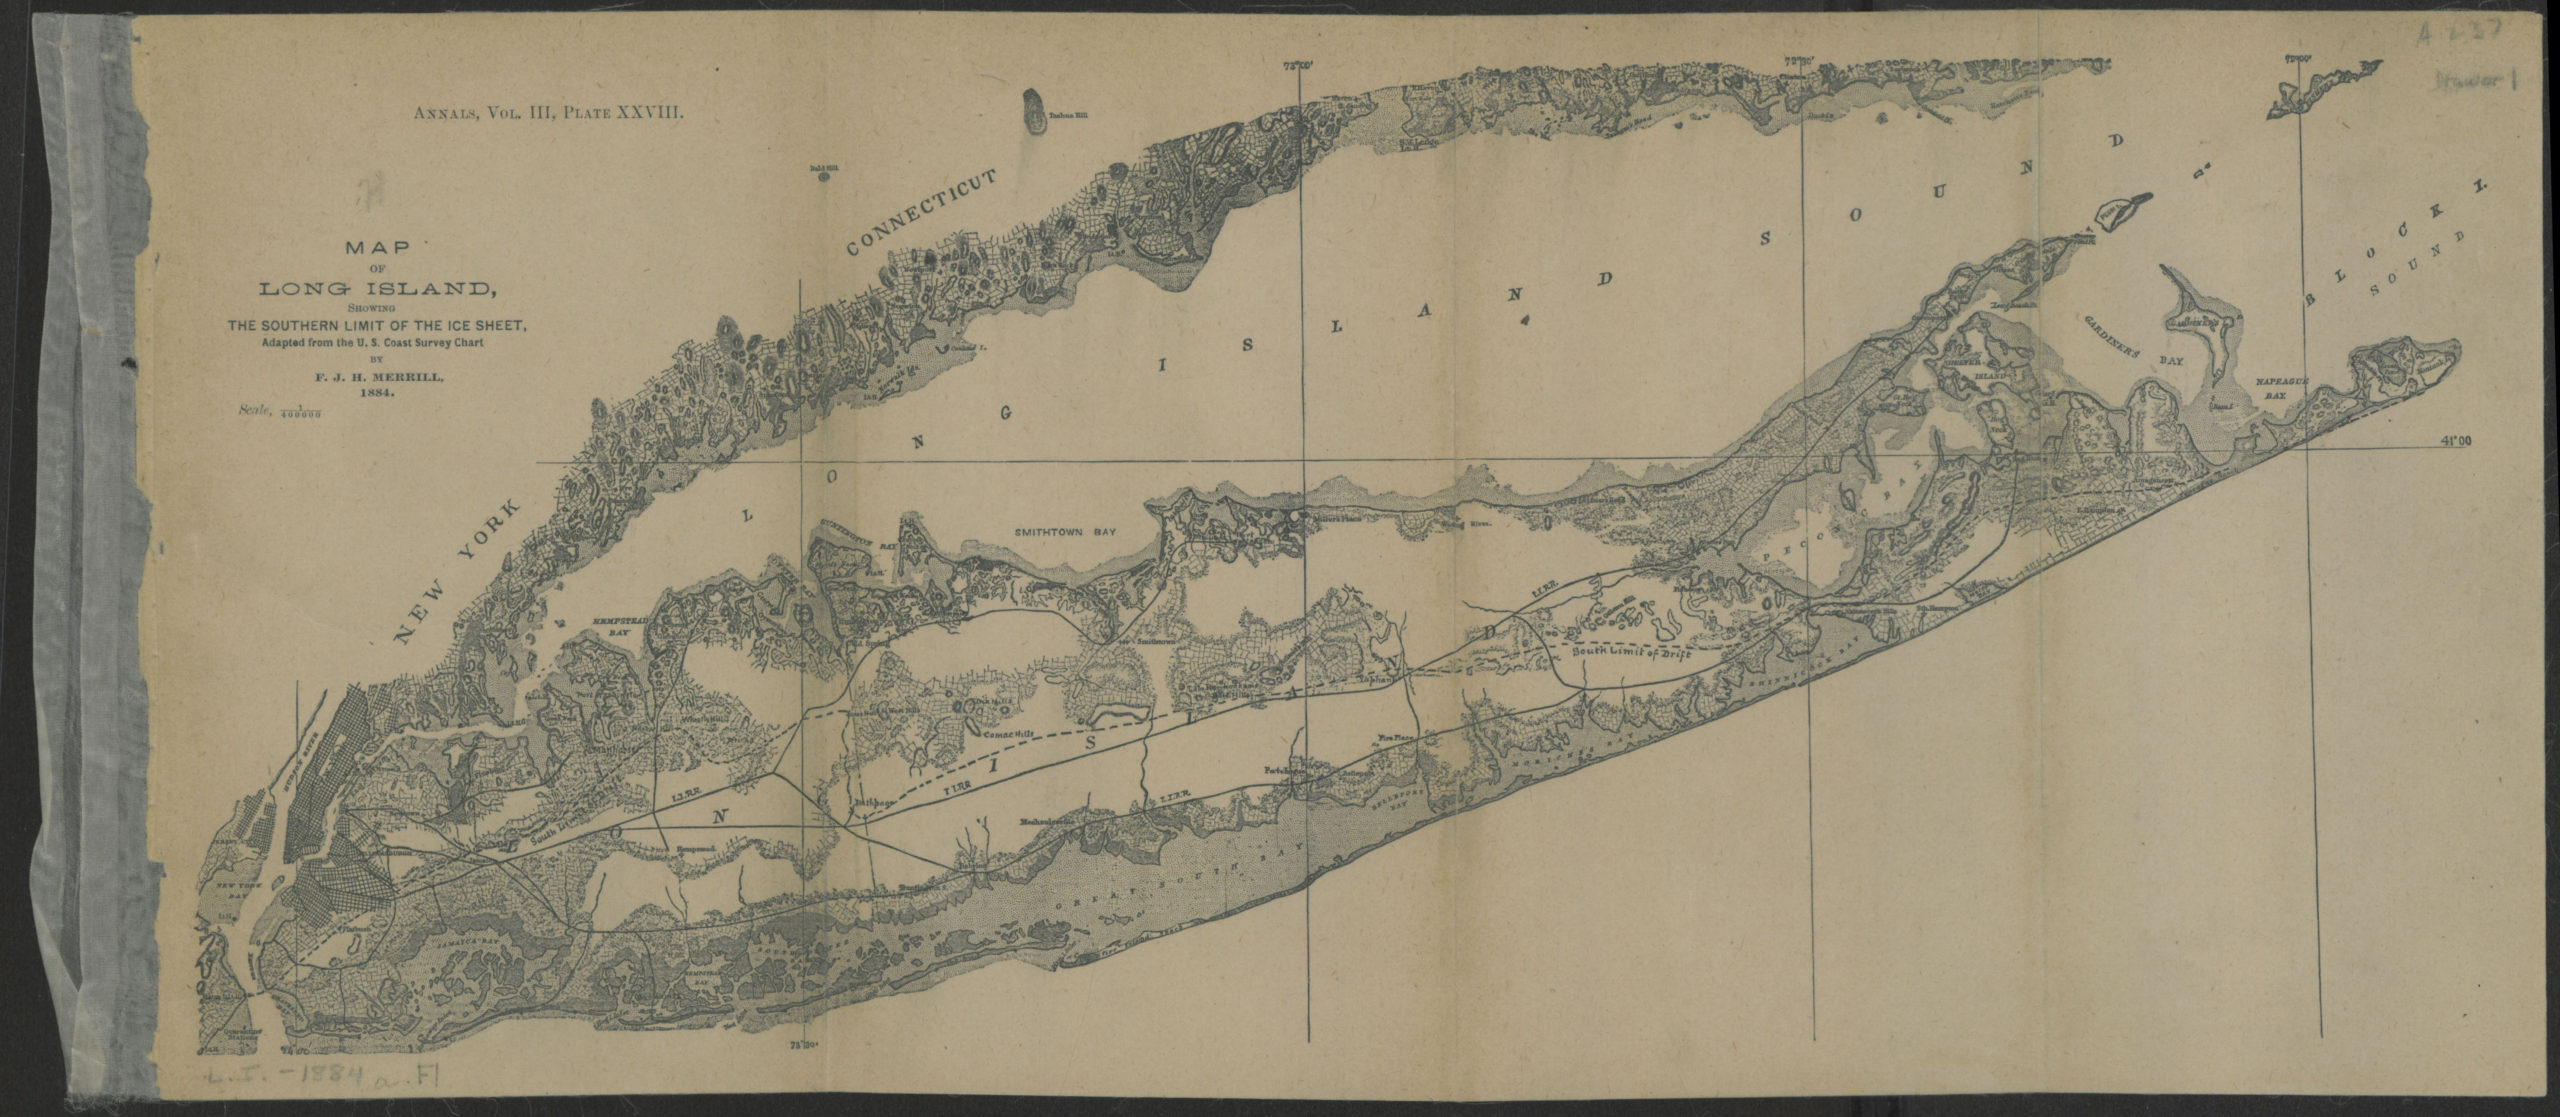 https://mapcollections.brooklynhistory.org/wp-content/uploads/sites/8/2020/02/bhs_li003381962_a-scaled.jpg